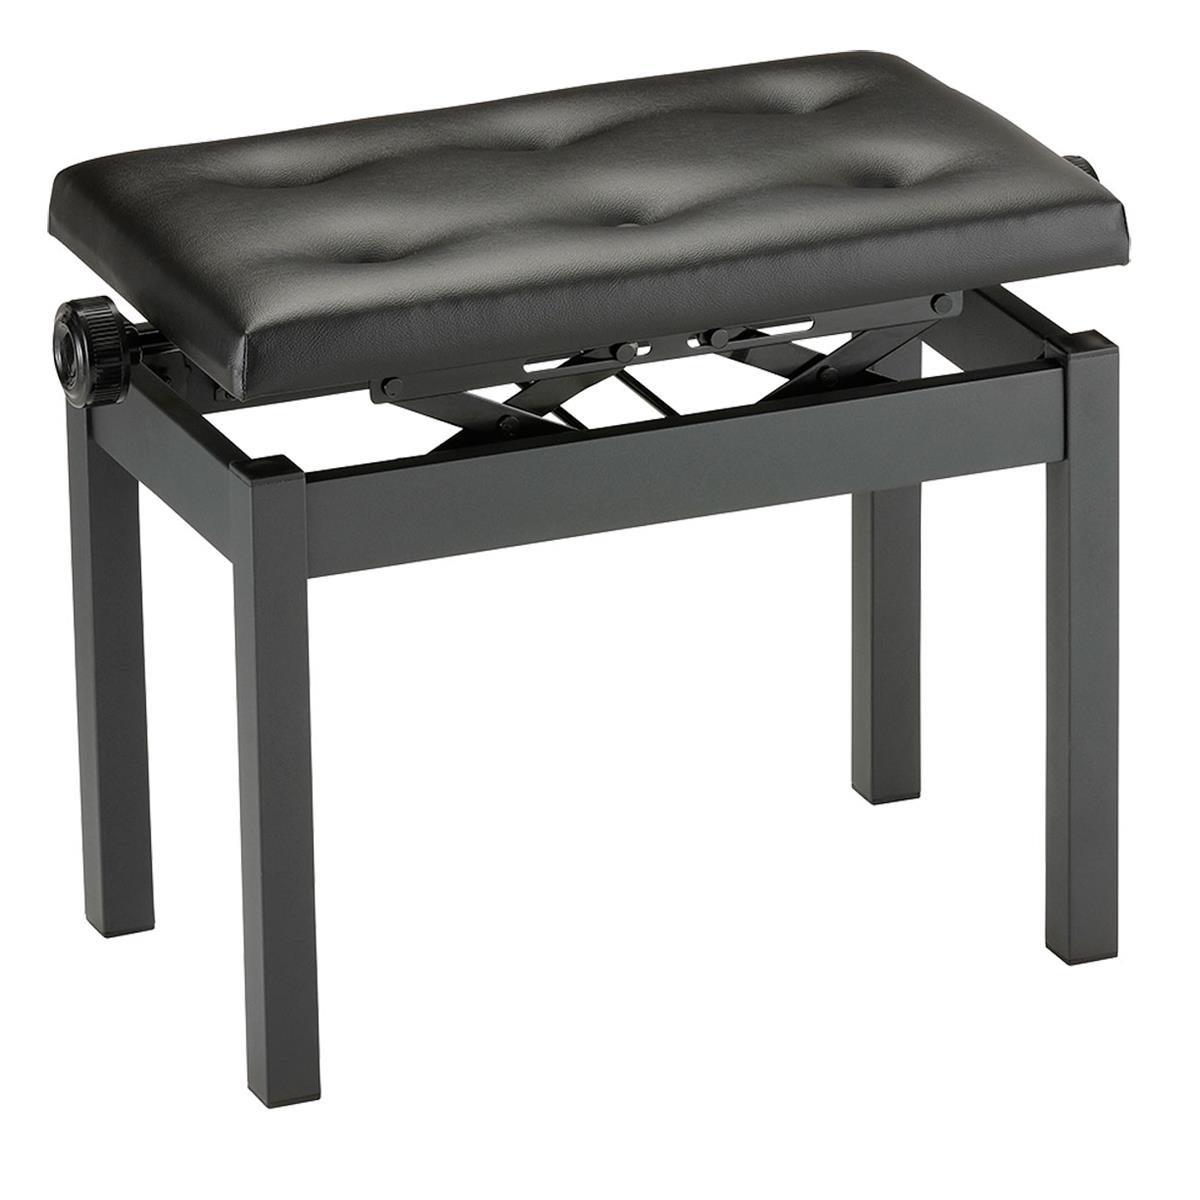 Image of Korg PC-770 Height Adjustable Piano Bench with Wide Seating Surface